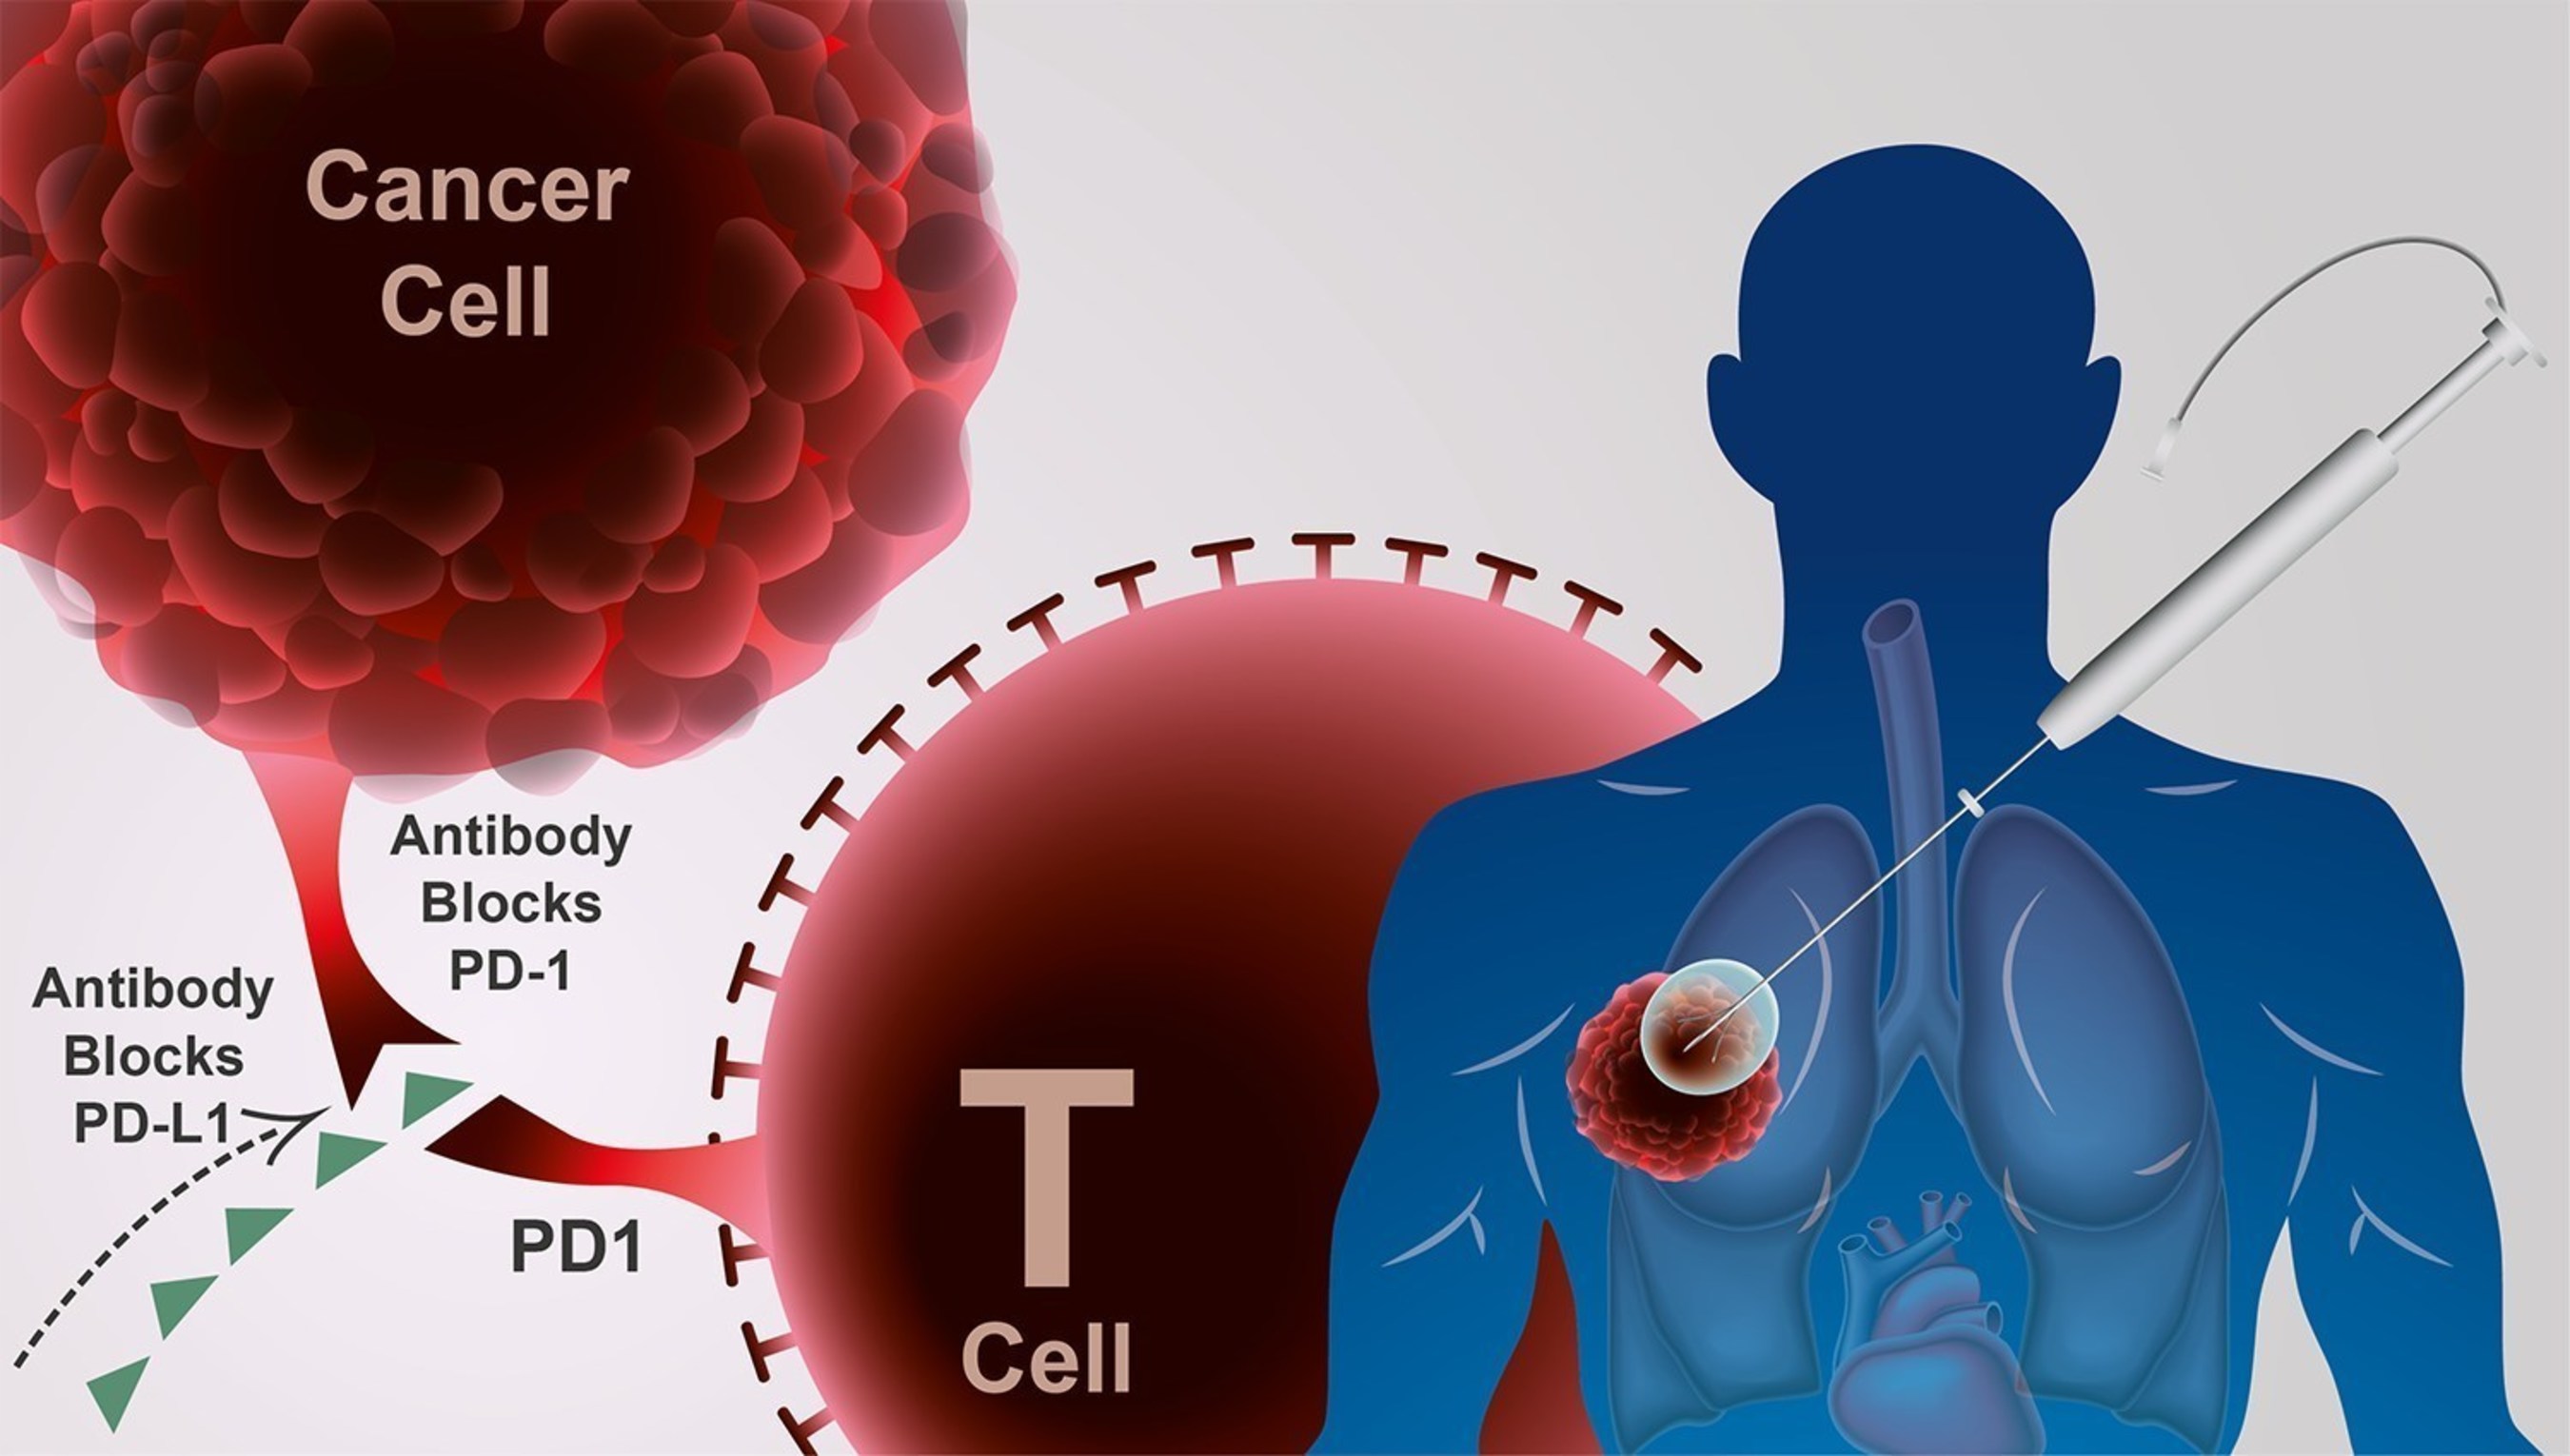 Cryoablation combined with immunotherapy enhances the anti-cancer immune response